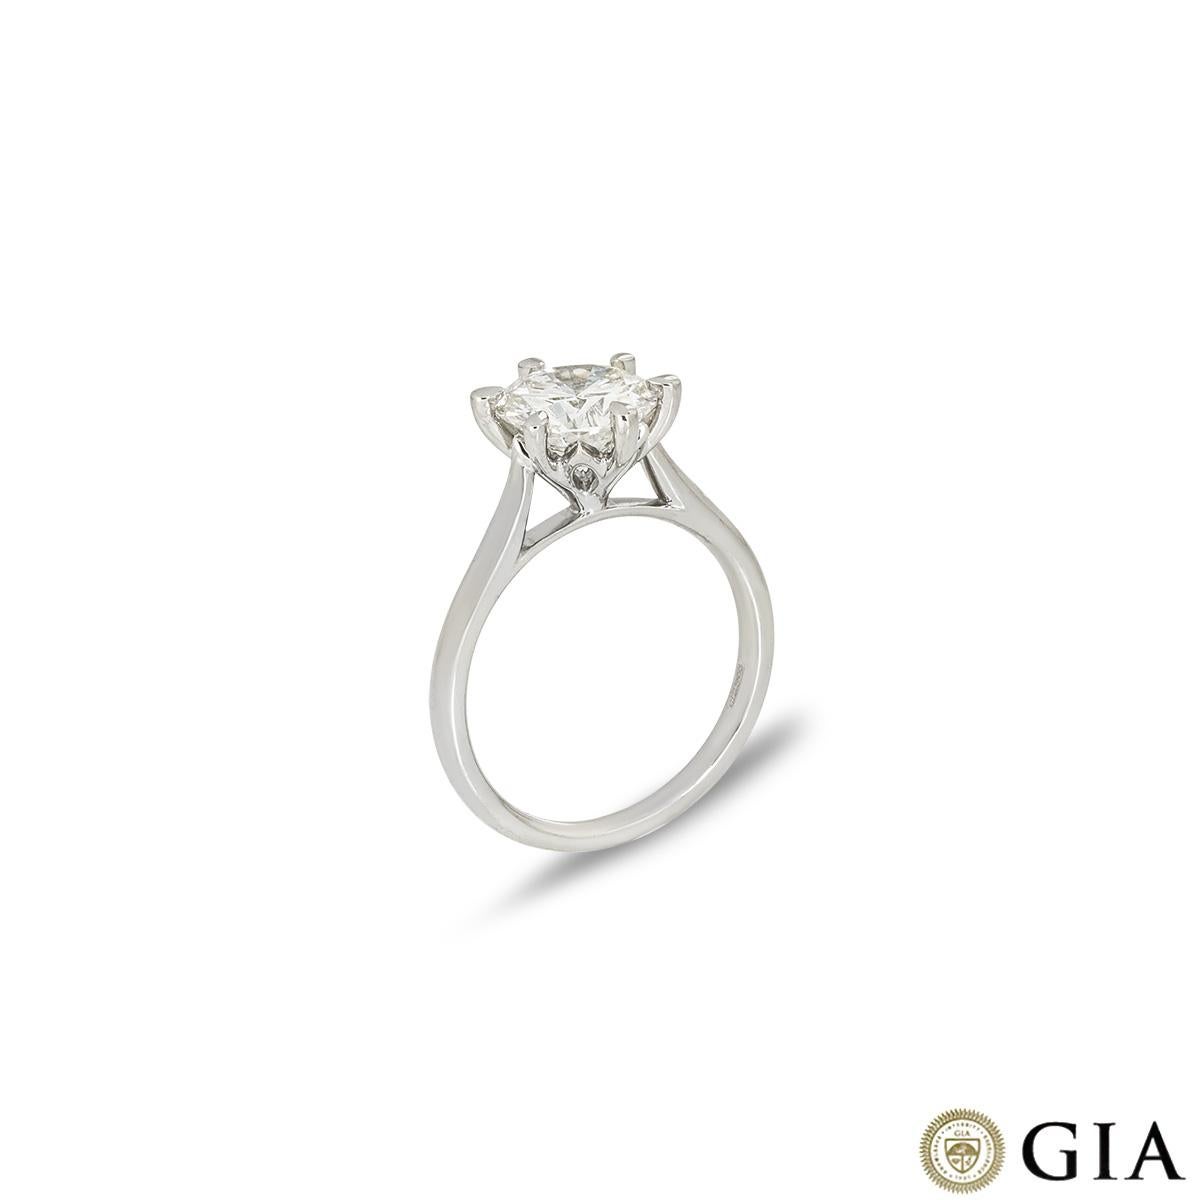 A dazzling platinum diamond engagement ring. The solitaire features a round brilliant cut diamond set in a contemporary six prong mount weighting 2.06ct, I colour and VS1 clarity. The 2mm wide ring has a gross weight of 5.30 grams and is currently a